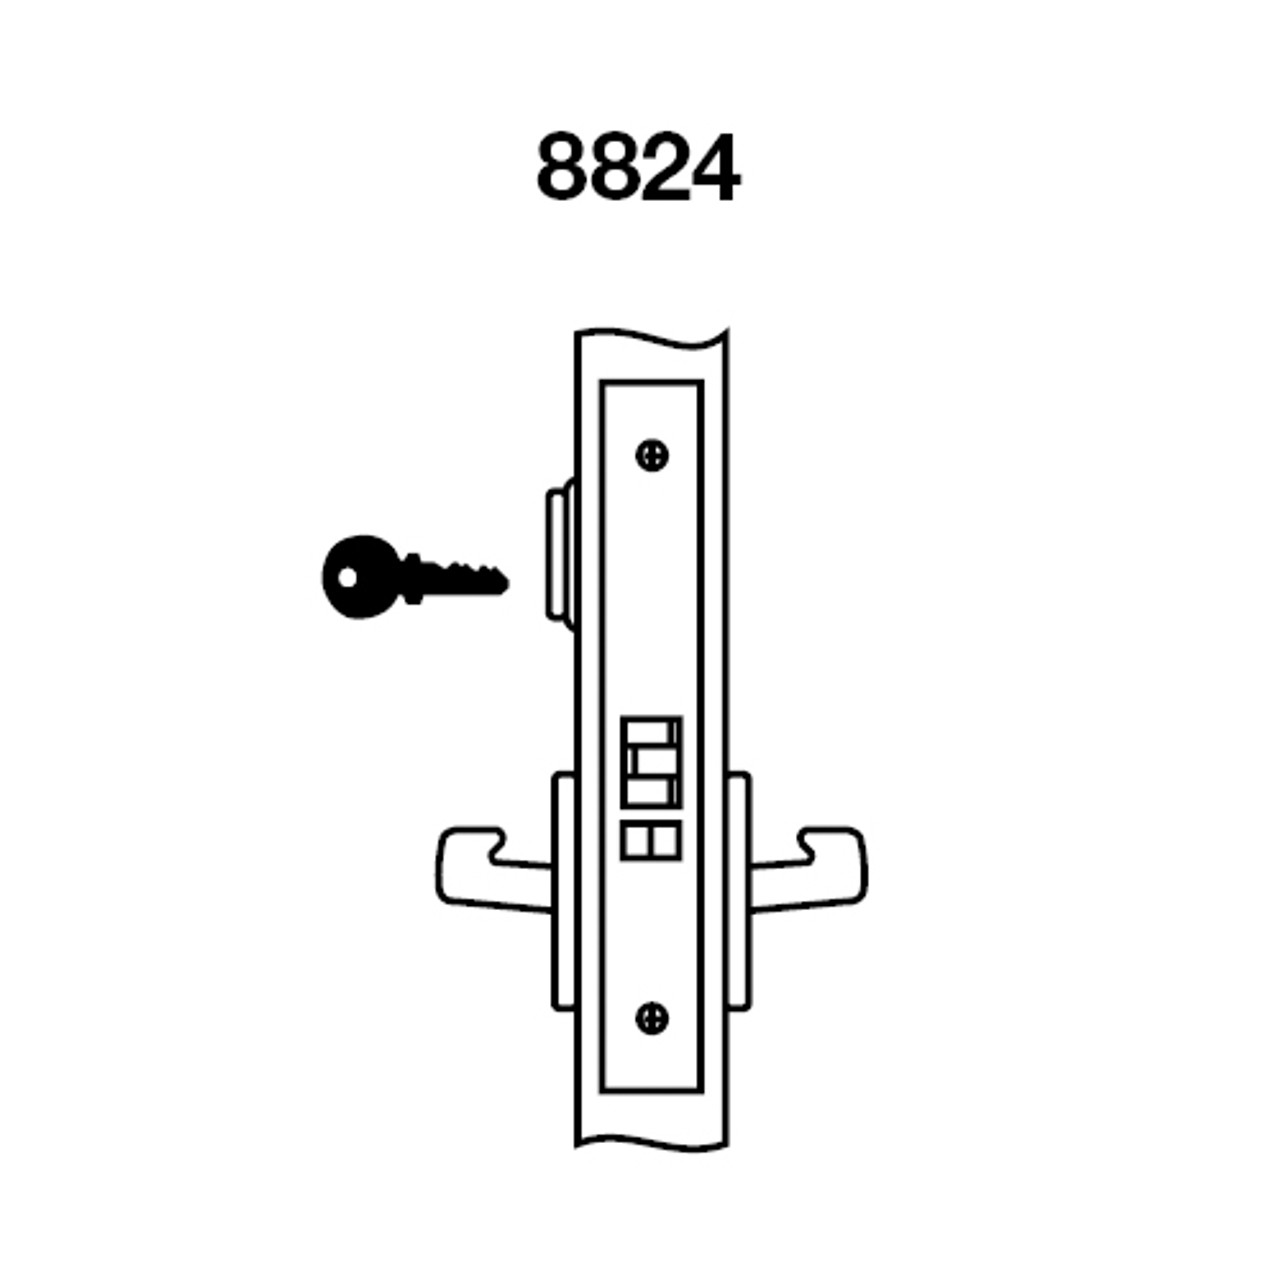 CRCN8824FL-618 Yale 8800FL Series Single Cylinder Mortise Hold Back Locks with Carmel Lever in Bright Nickel